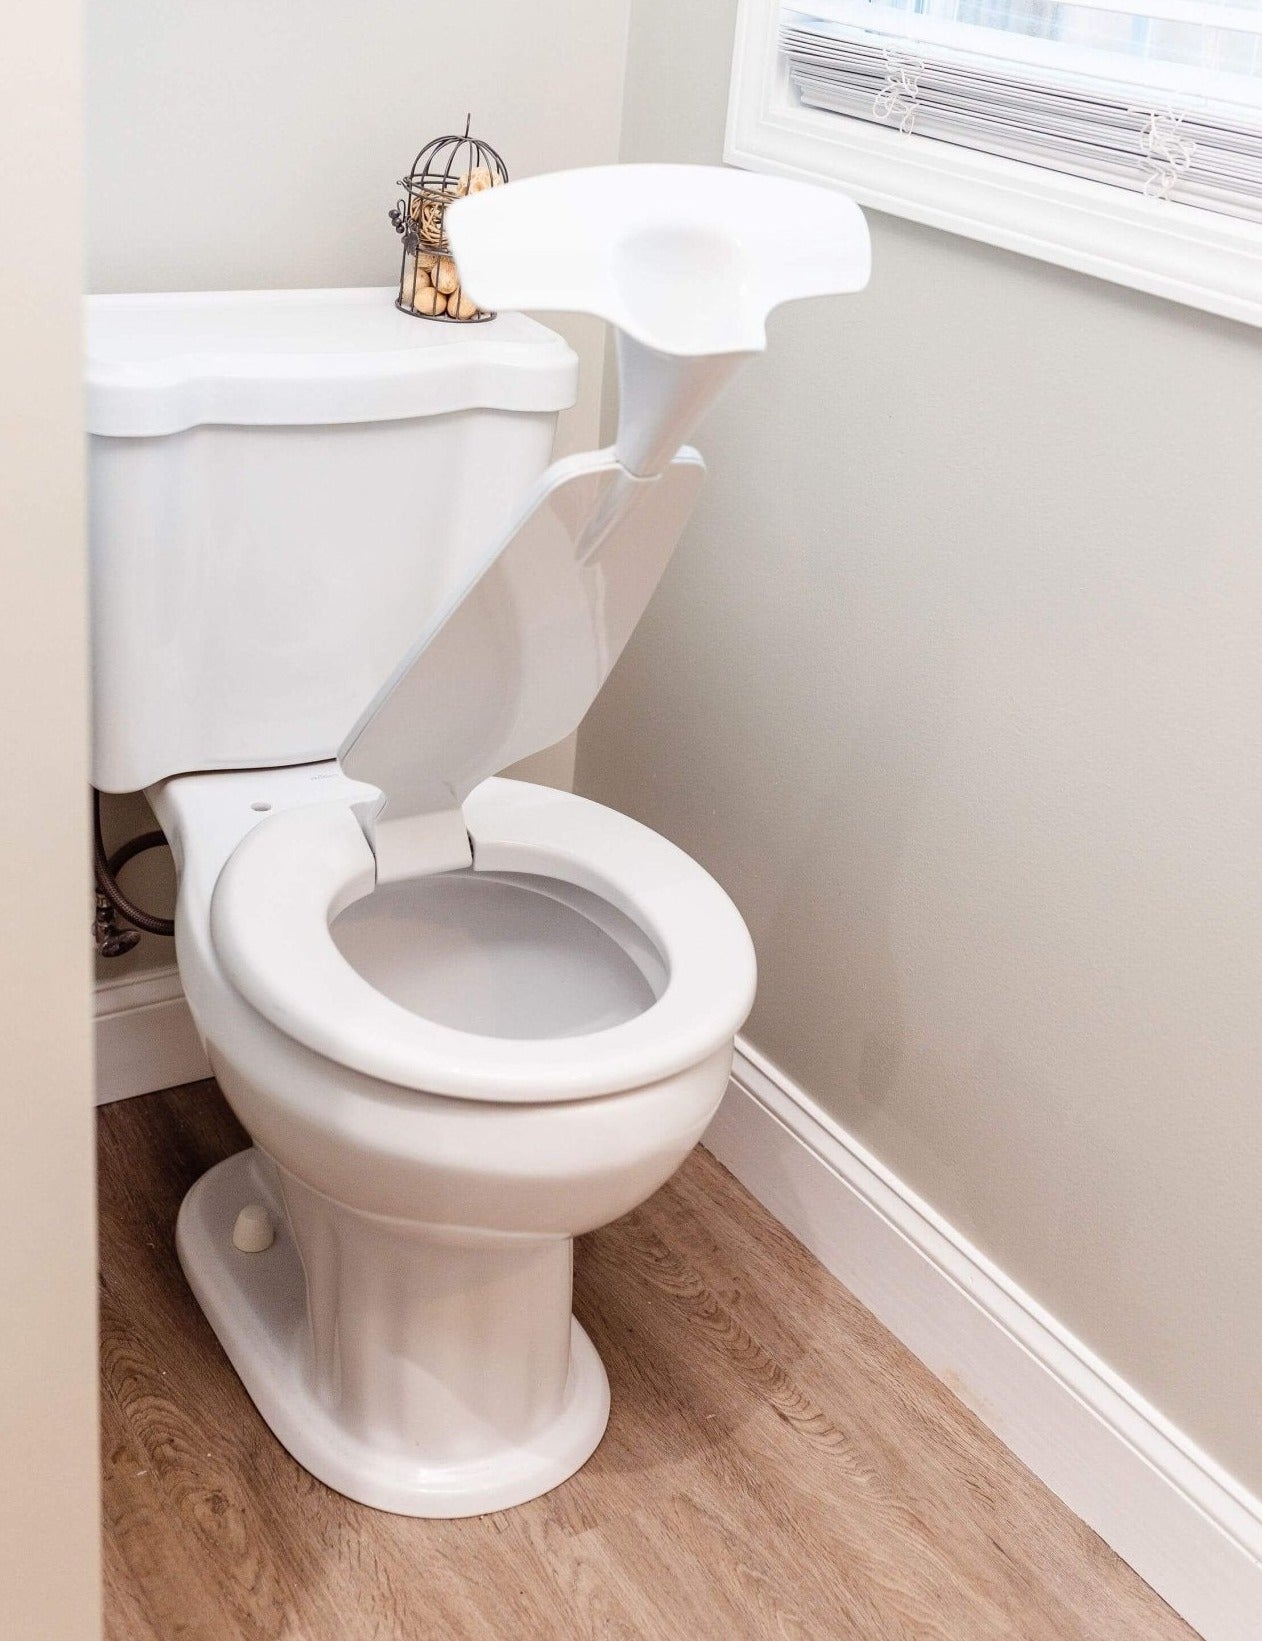 Home Toilet Seat with Urinal